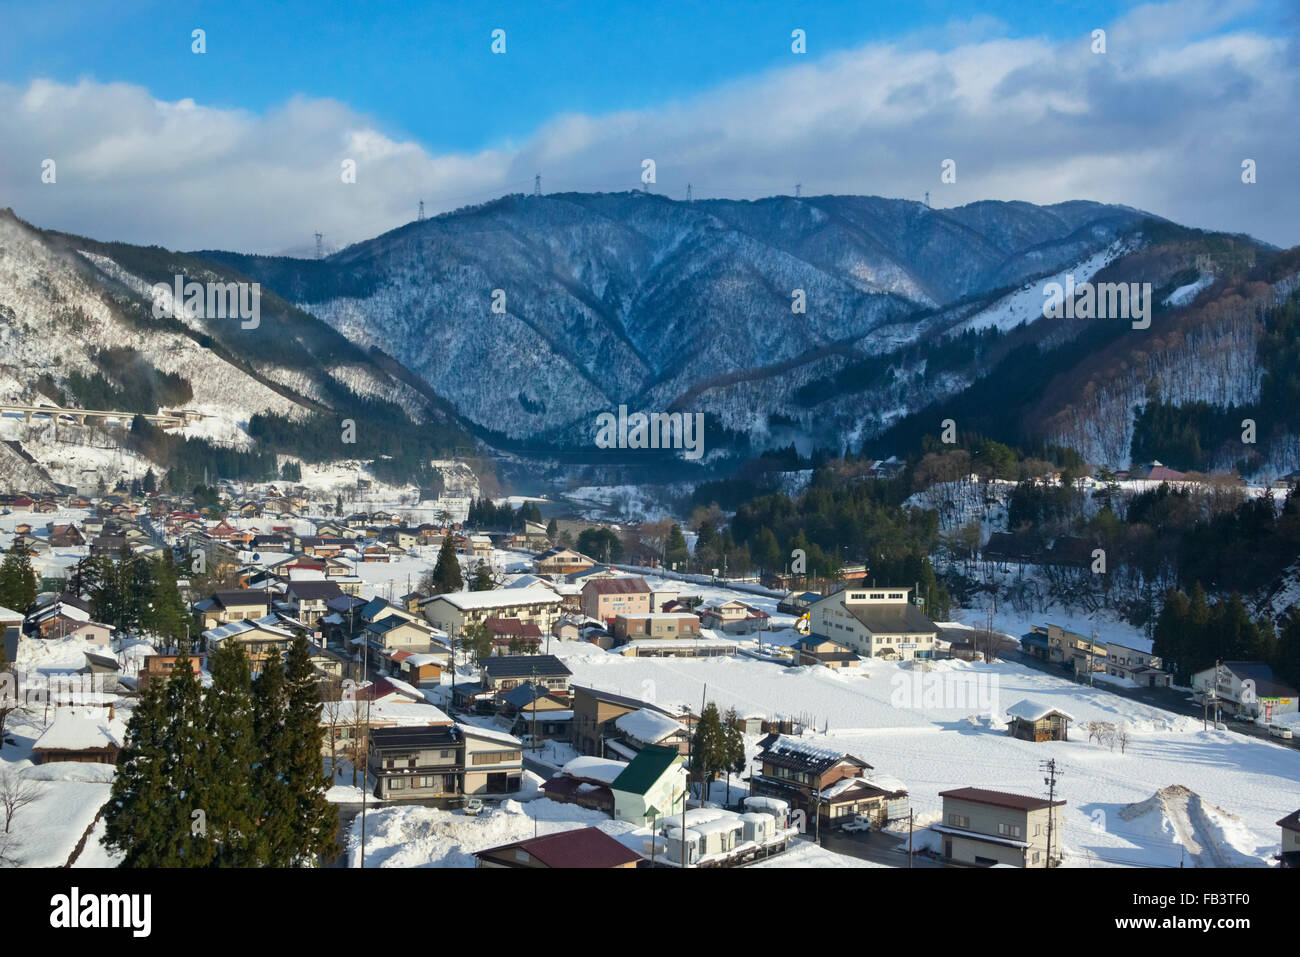 Village covered with snow in the mountain, Gifu Prefecture, Japan Stock Photo